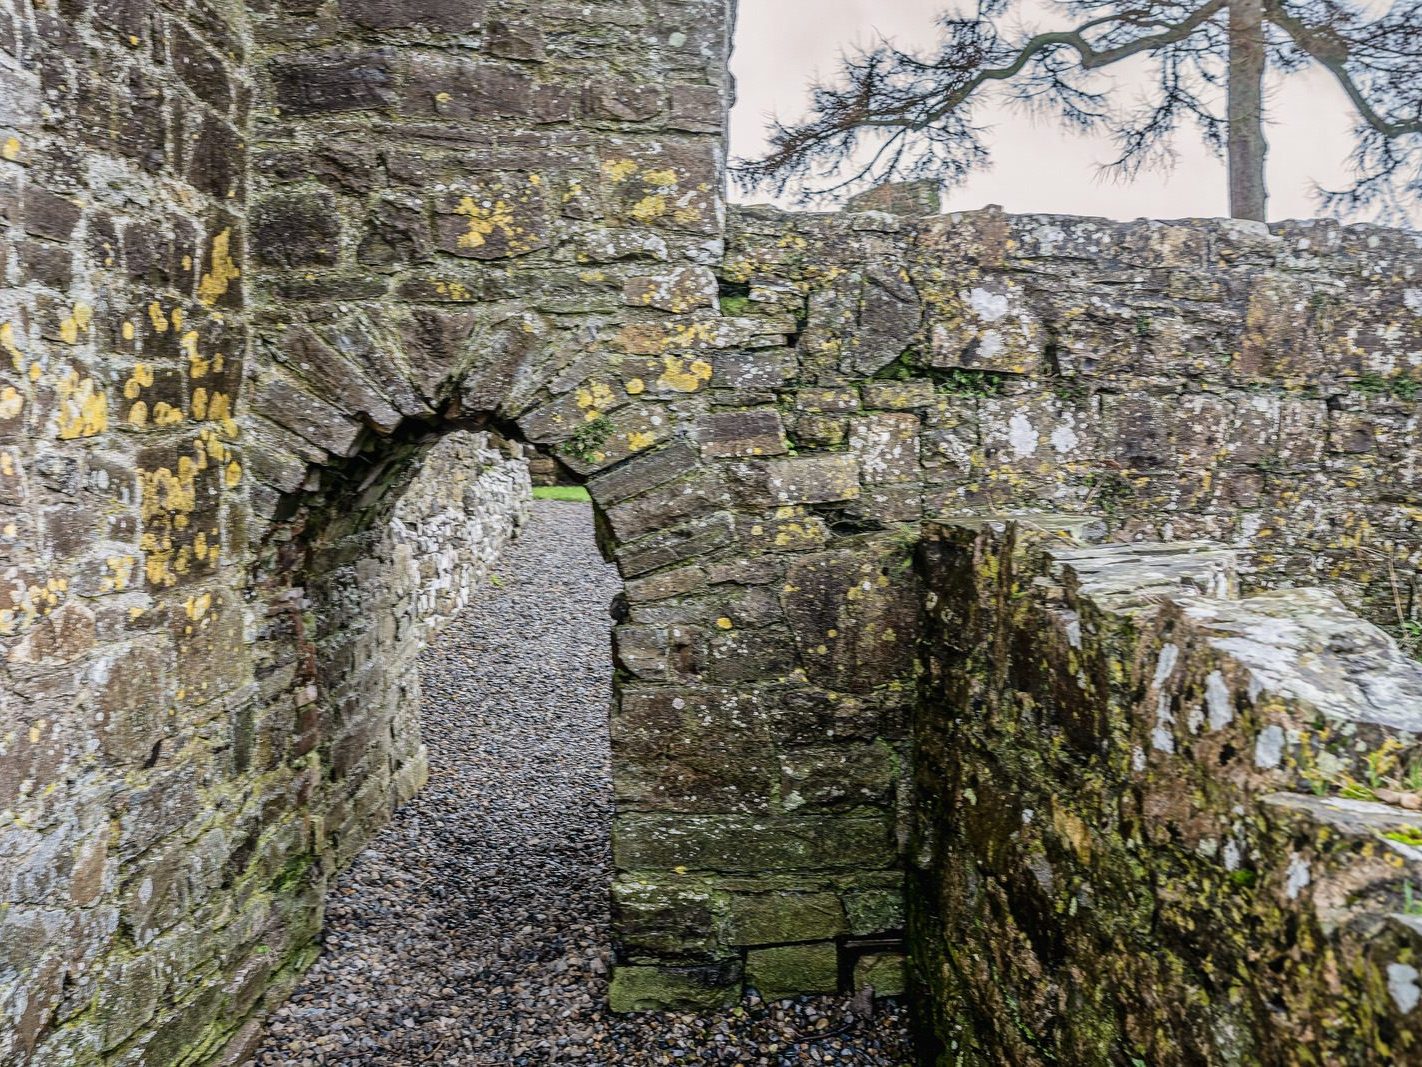 BECTIVE ABBEY WHICH I VISITED LAST CHRISTMAS [THERE WERE NO OTHER VISITORS AS IT WAS A VERY WET DAY]--225247-1